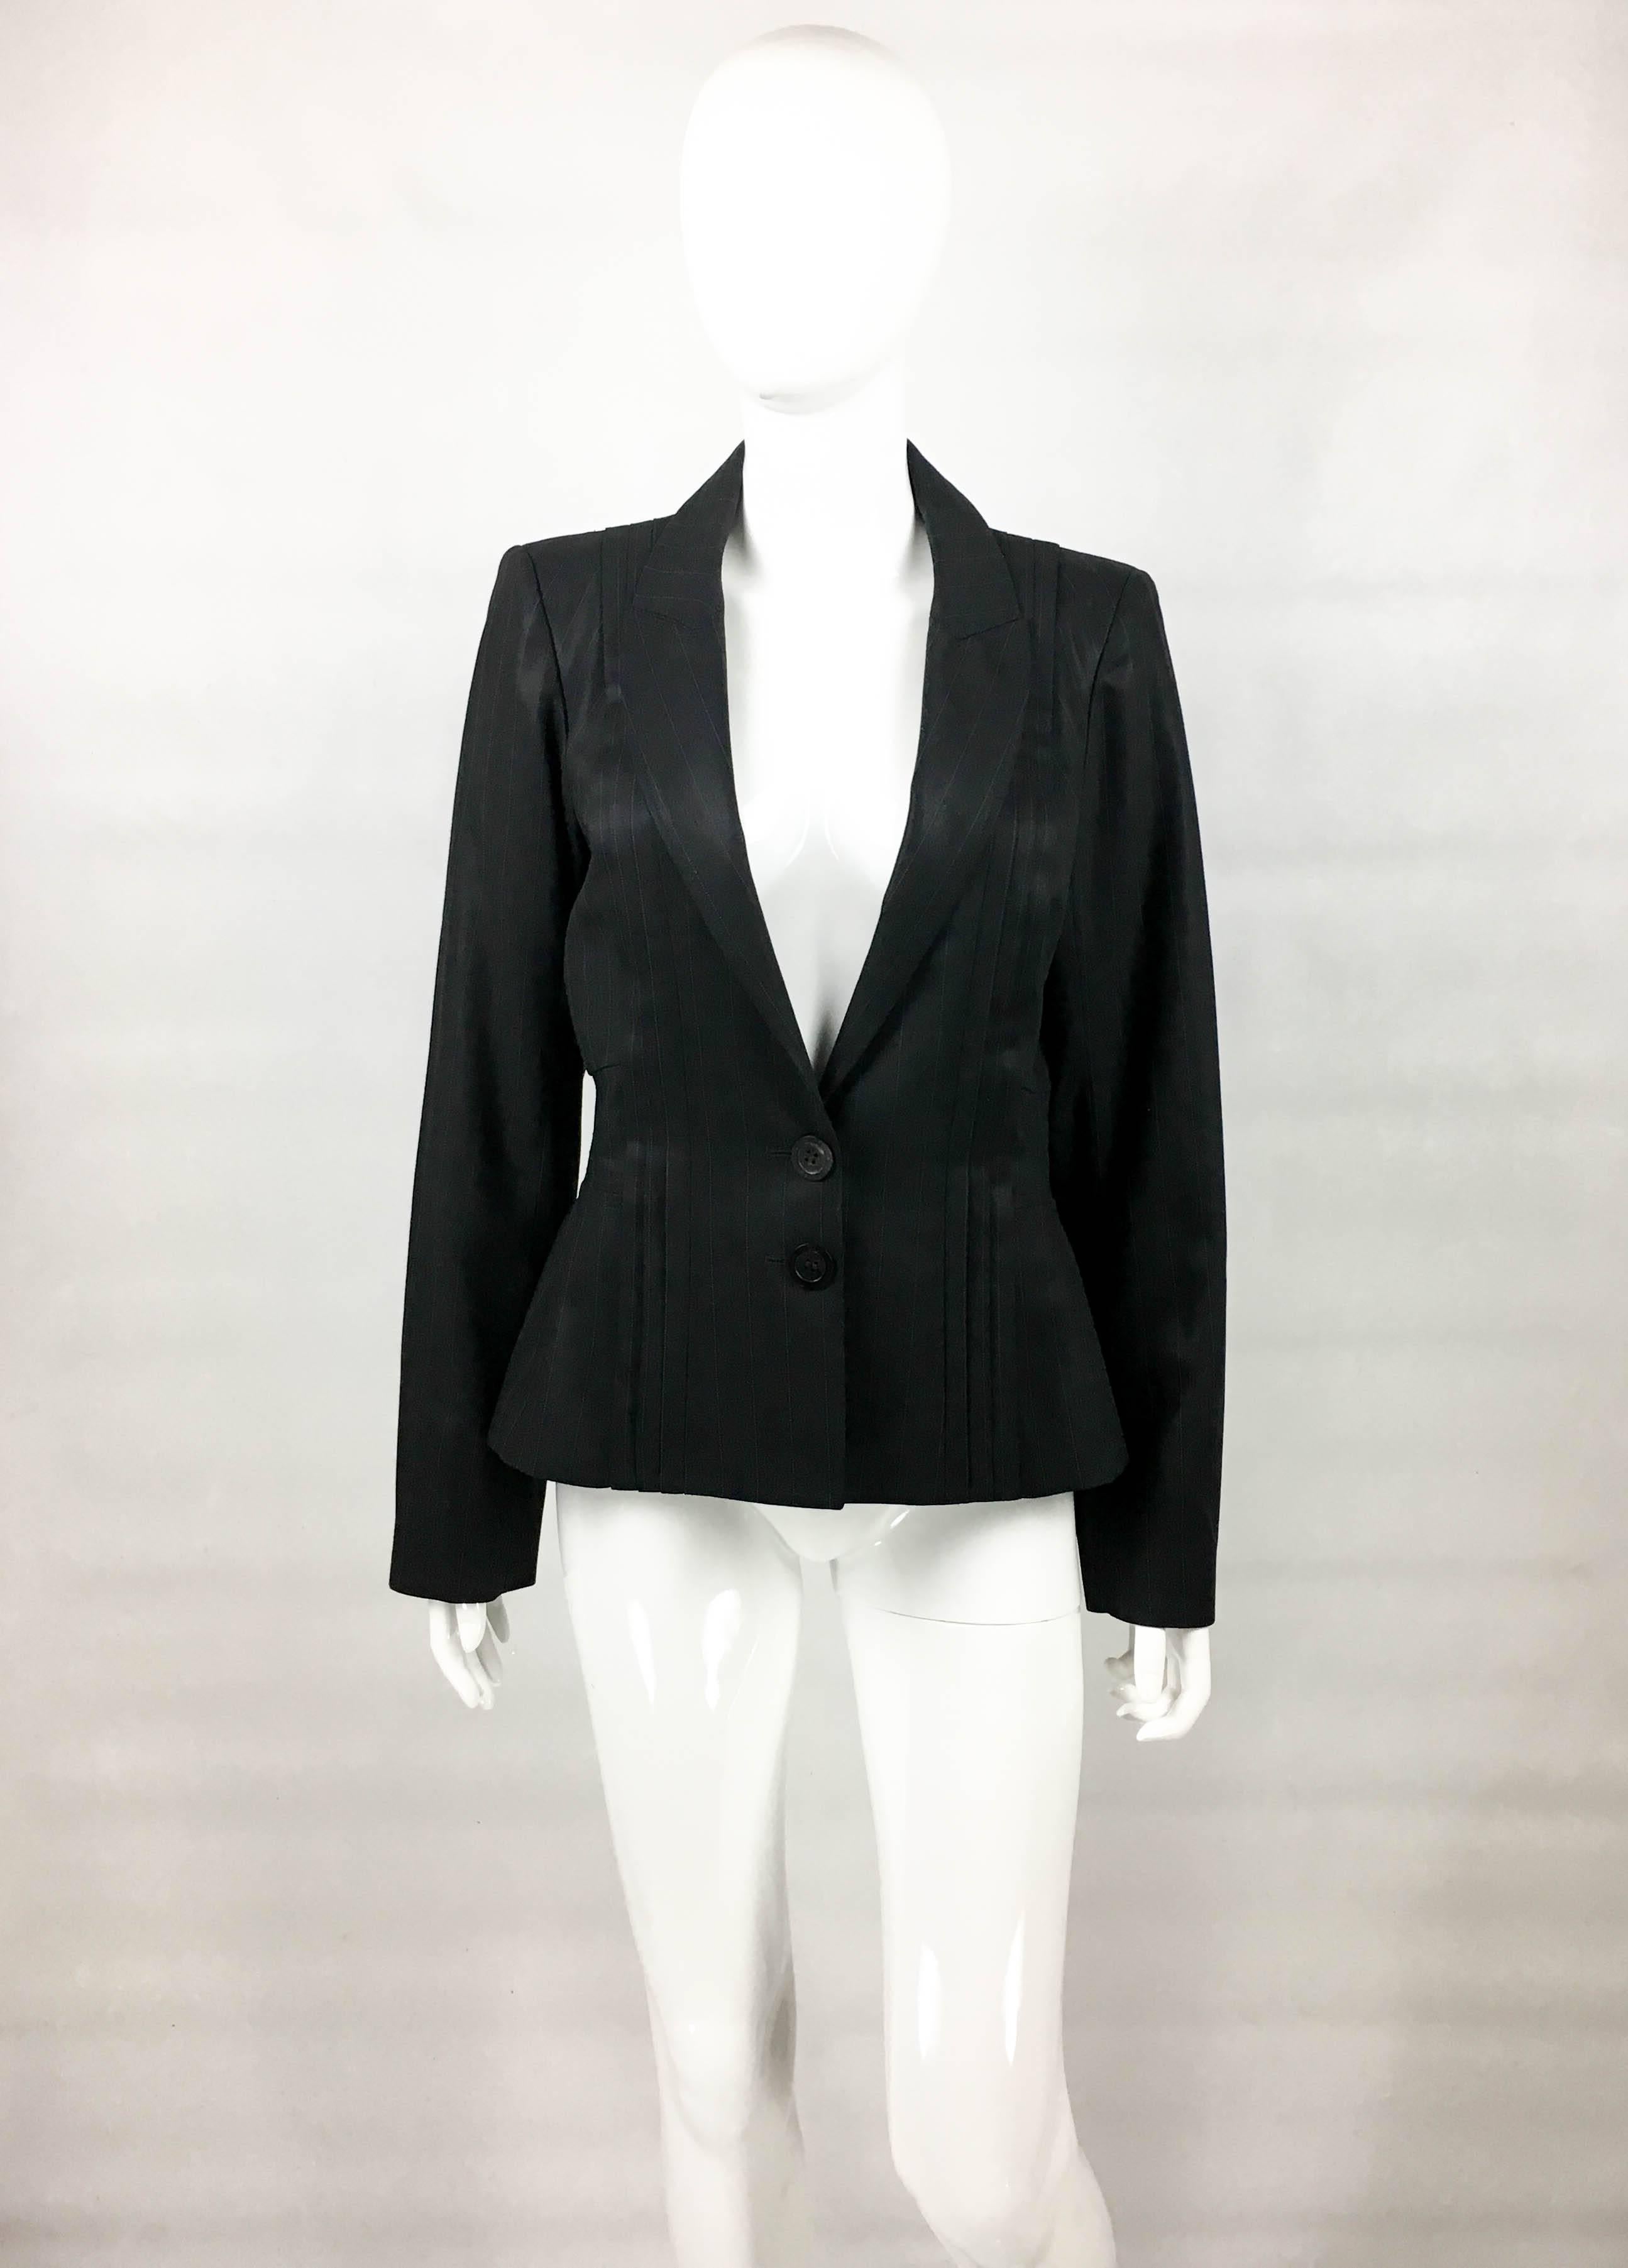 Dior by Galliano Pinstripe Pleated Jacket. This very stylish jacket by Dior was designed for the 2005 Spring / Summer collection. Made in light black wool pinstripe, it features pleats down the front and back. Also, there is panelling to the waist,